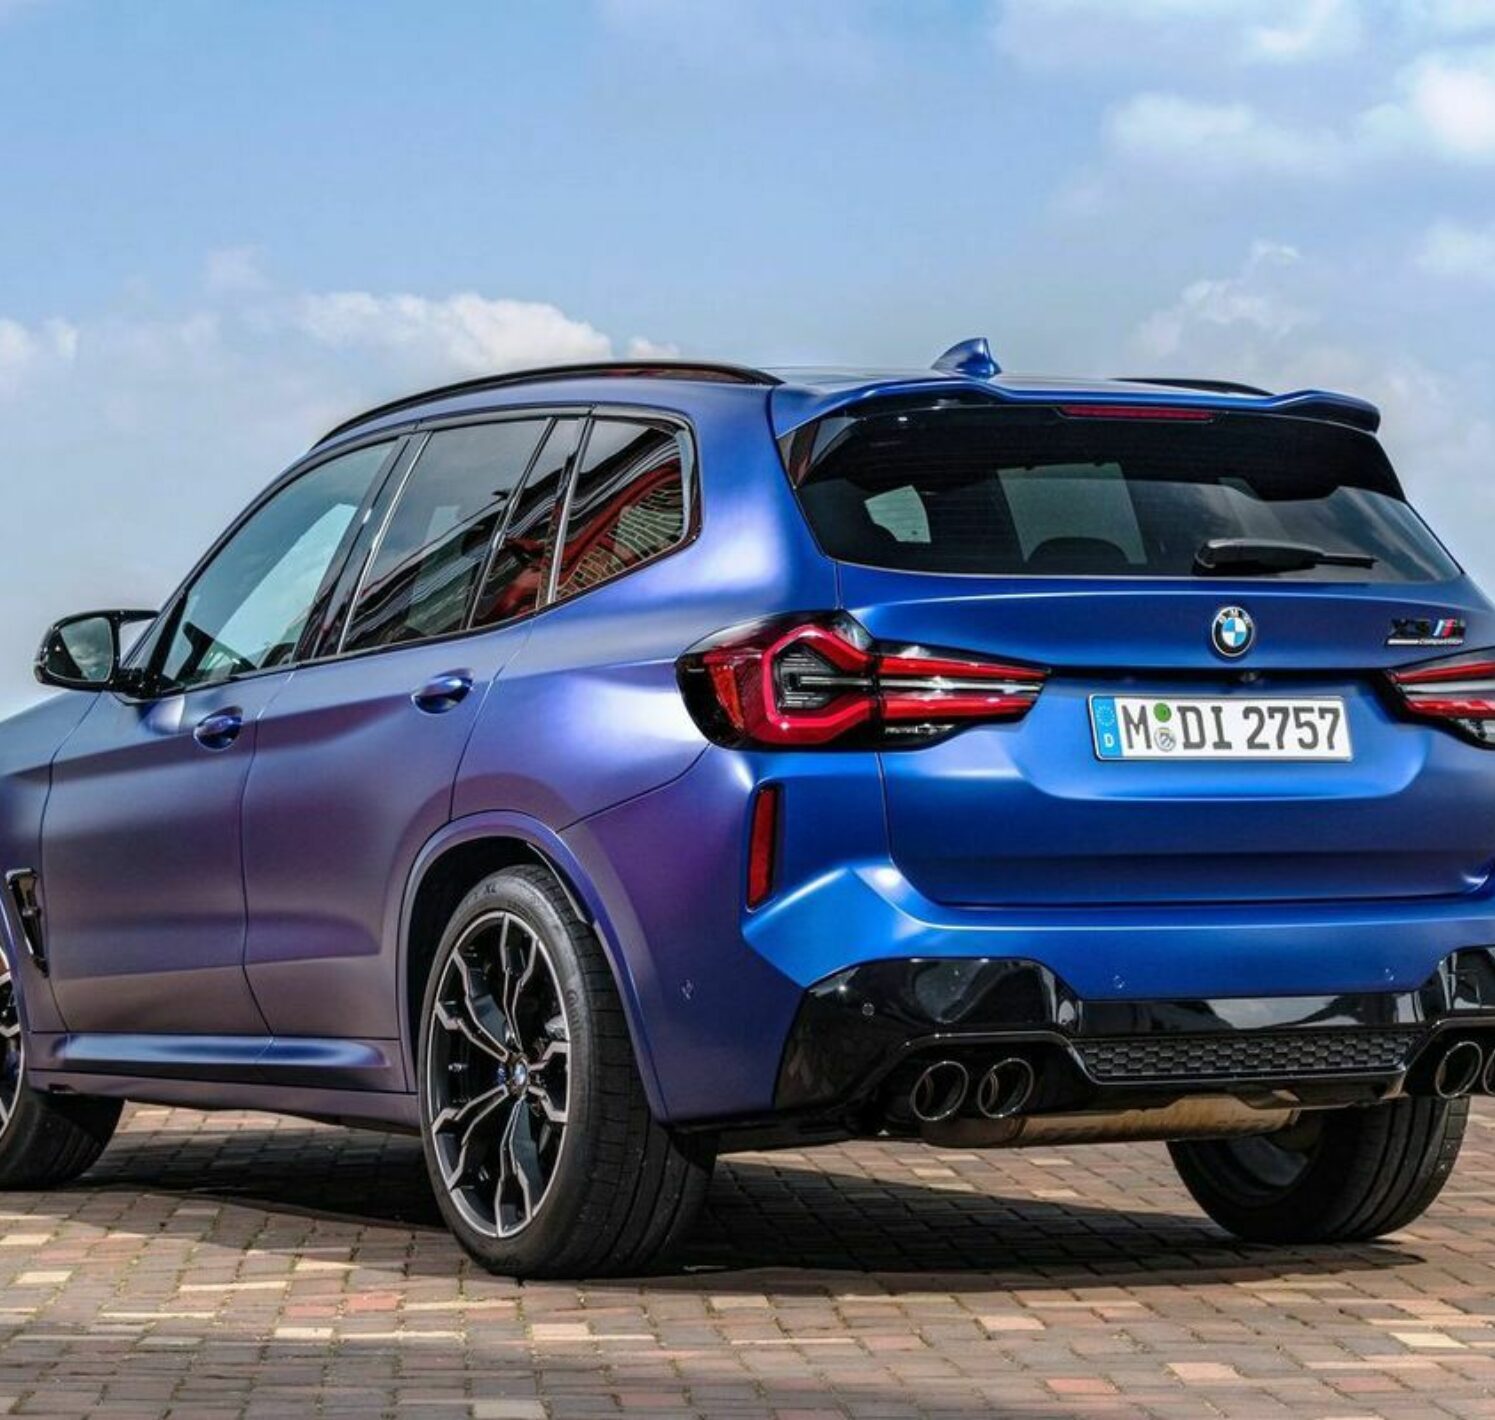 https://autofilter.sk/assets/images/x3/gallery/bmw-x3-m-competition-2022_05-galeria.jpg - obrazok